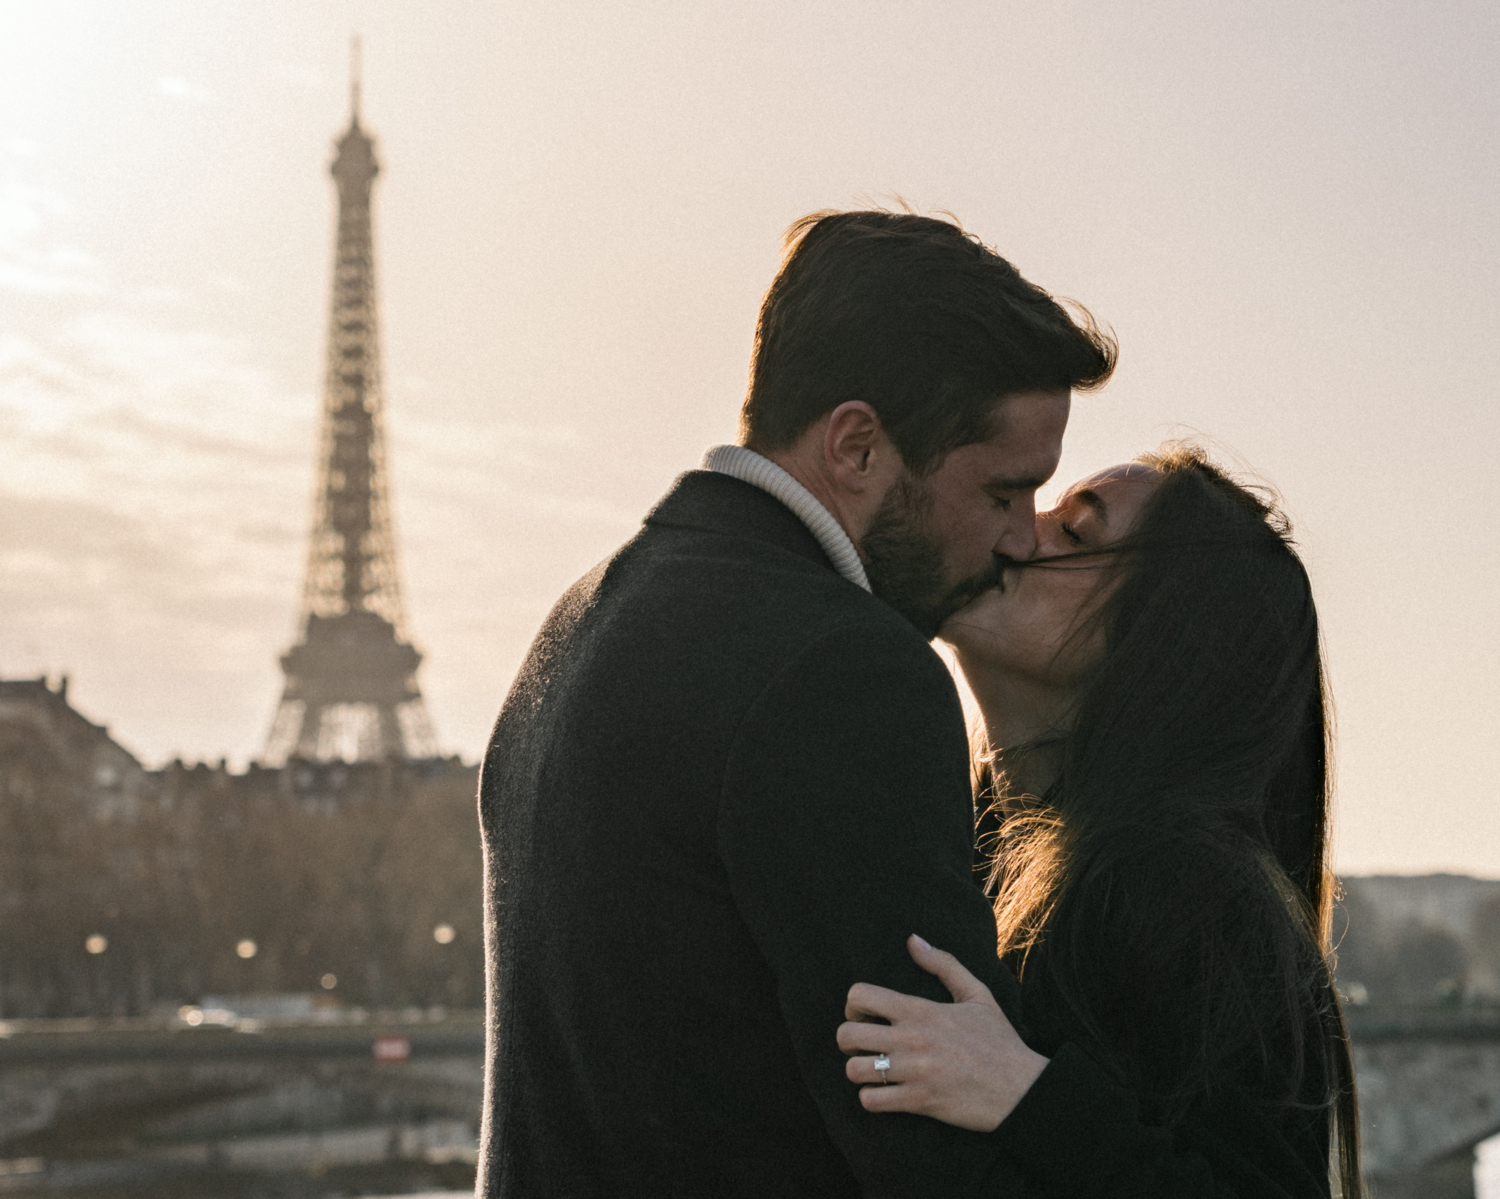 newly engaged couple kiss passionately with view of eiffel tower